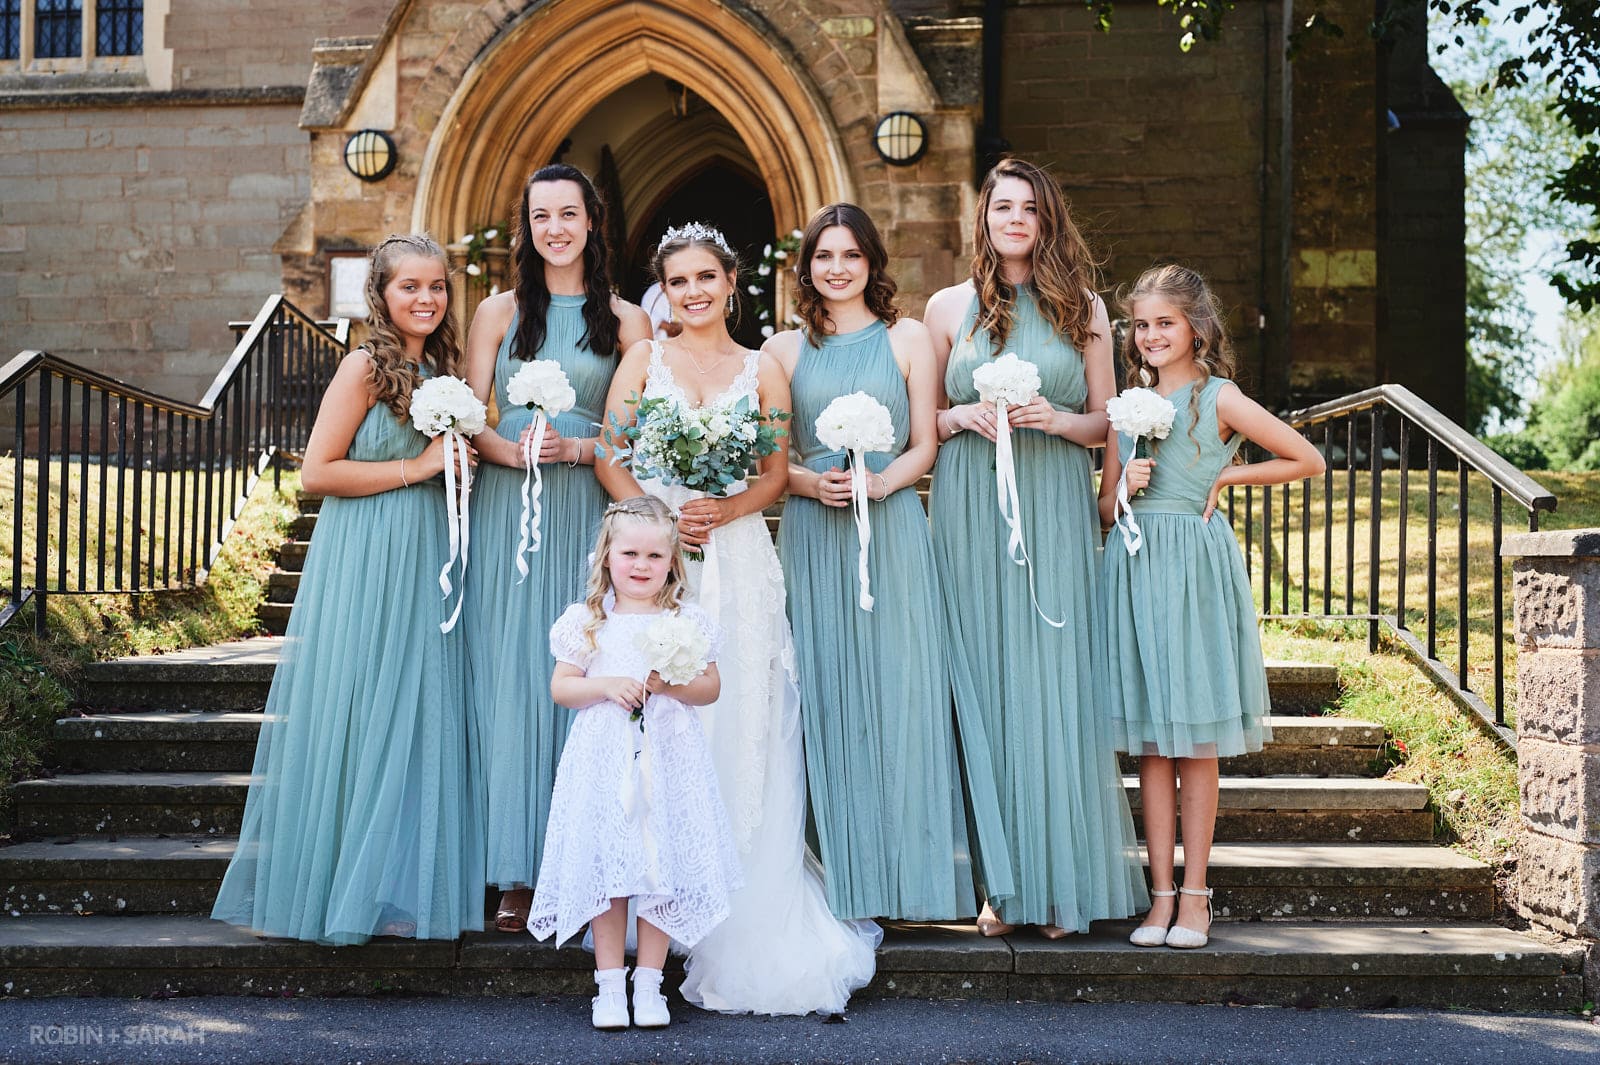 Group photo of bride and bridesmaids at St Peter's RC church Bromsgrove